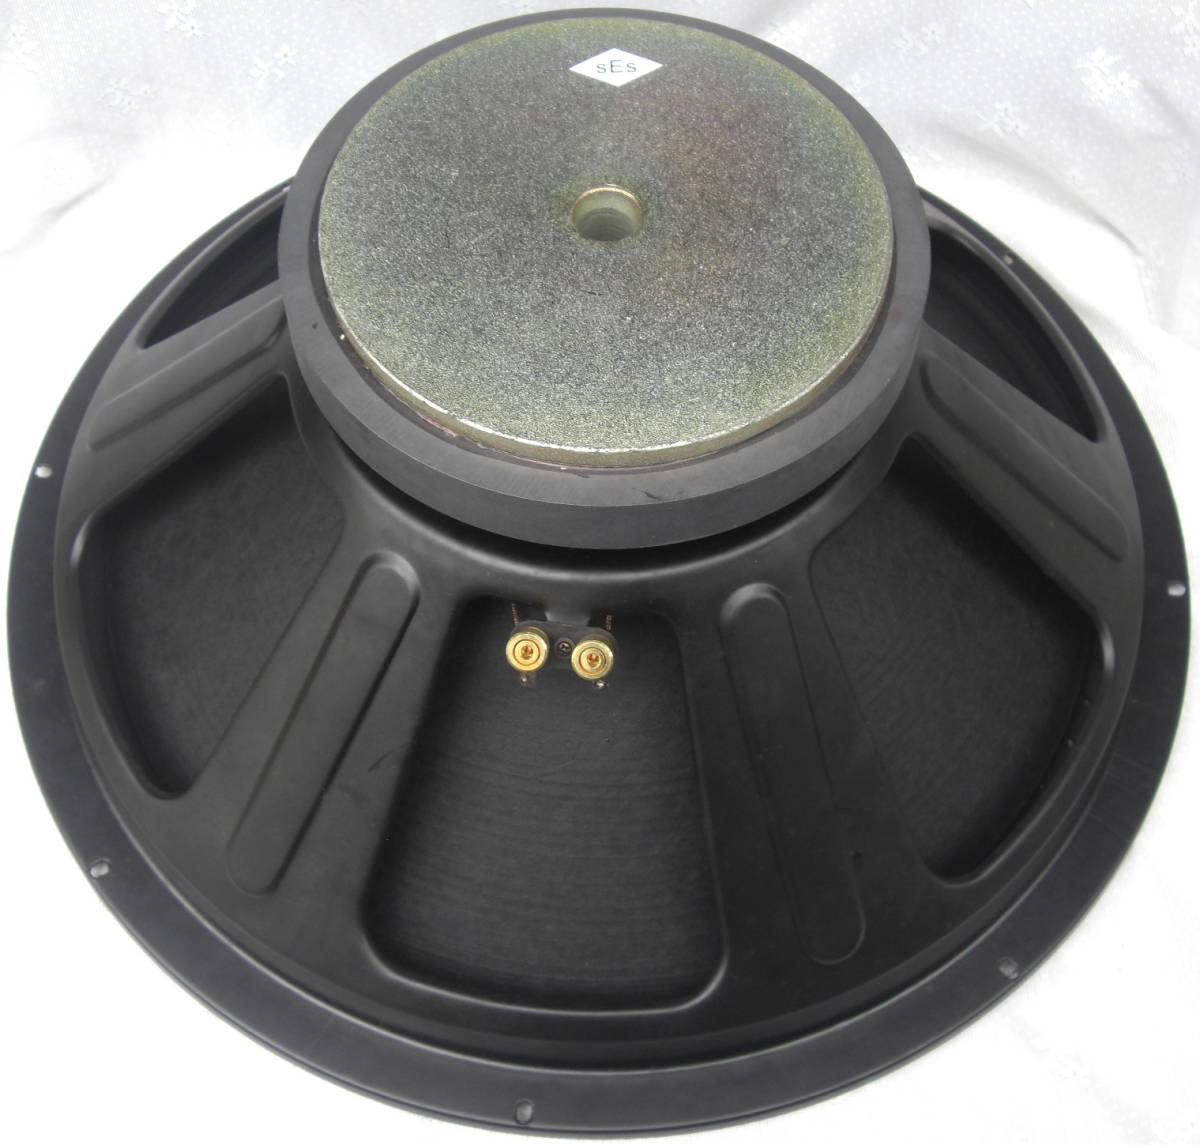  expectation!! large diameter 53cm woofer speaker unit New Year (Spring) great special price sale 02 month 11 day ..21 until the day new goods unused goods.2 pcs set 